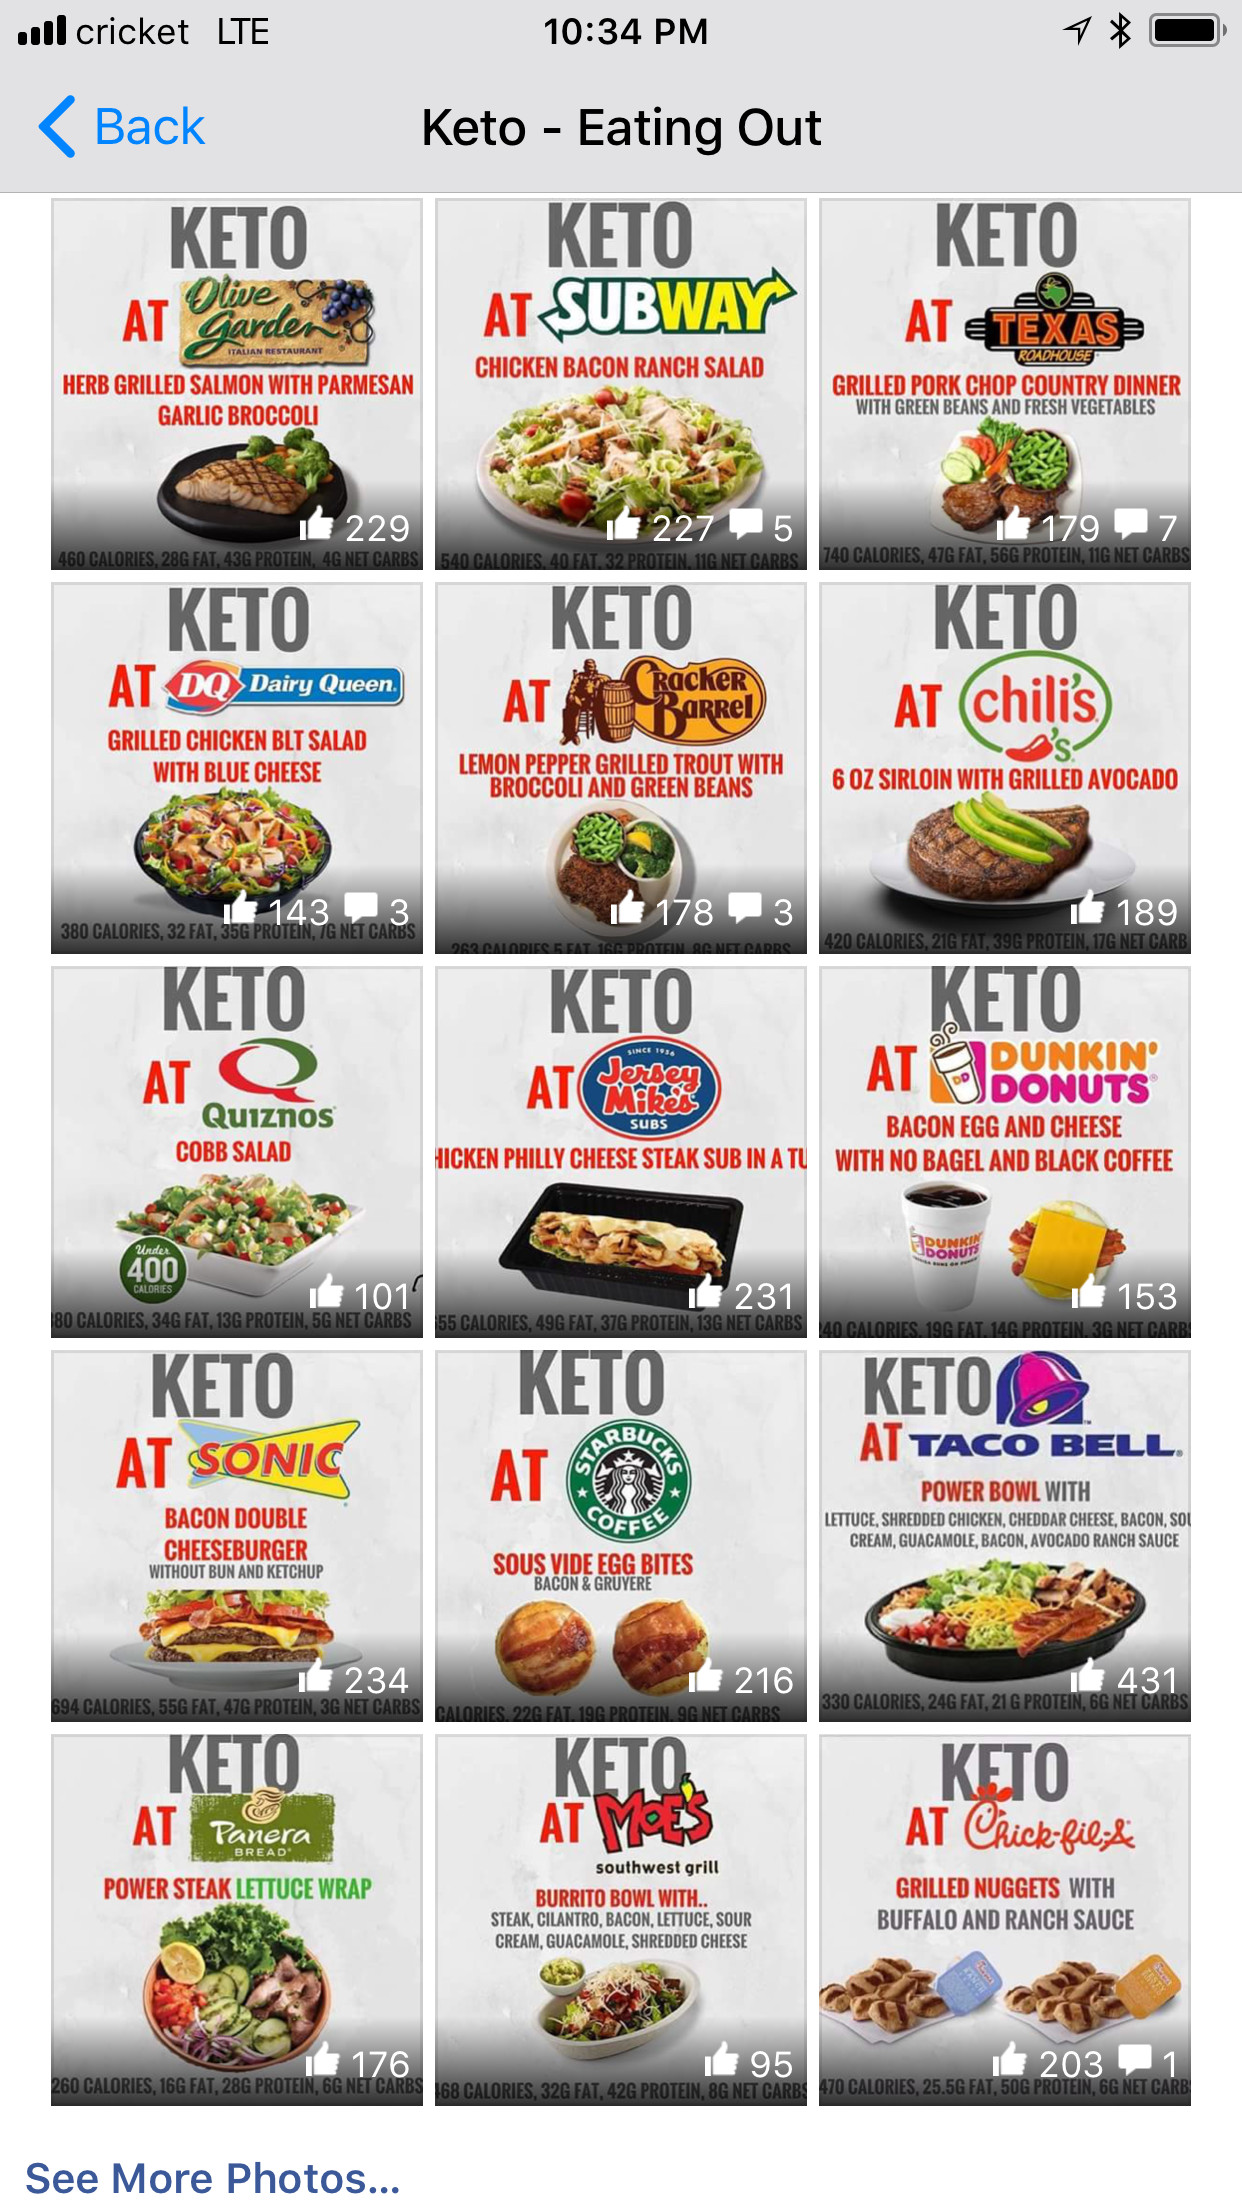 Keto Diet Fast Food Options
 What to eat keto at popular restaurants